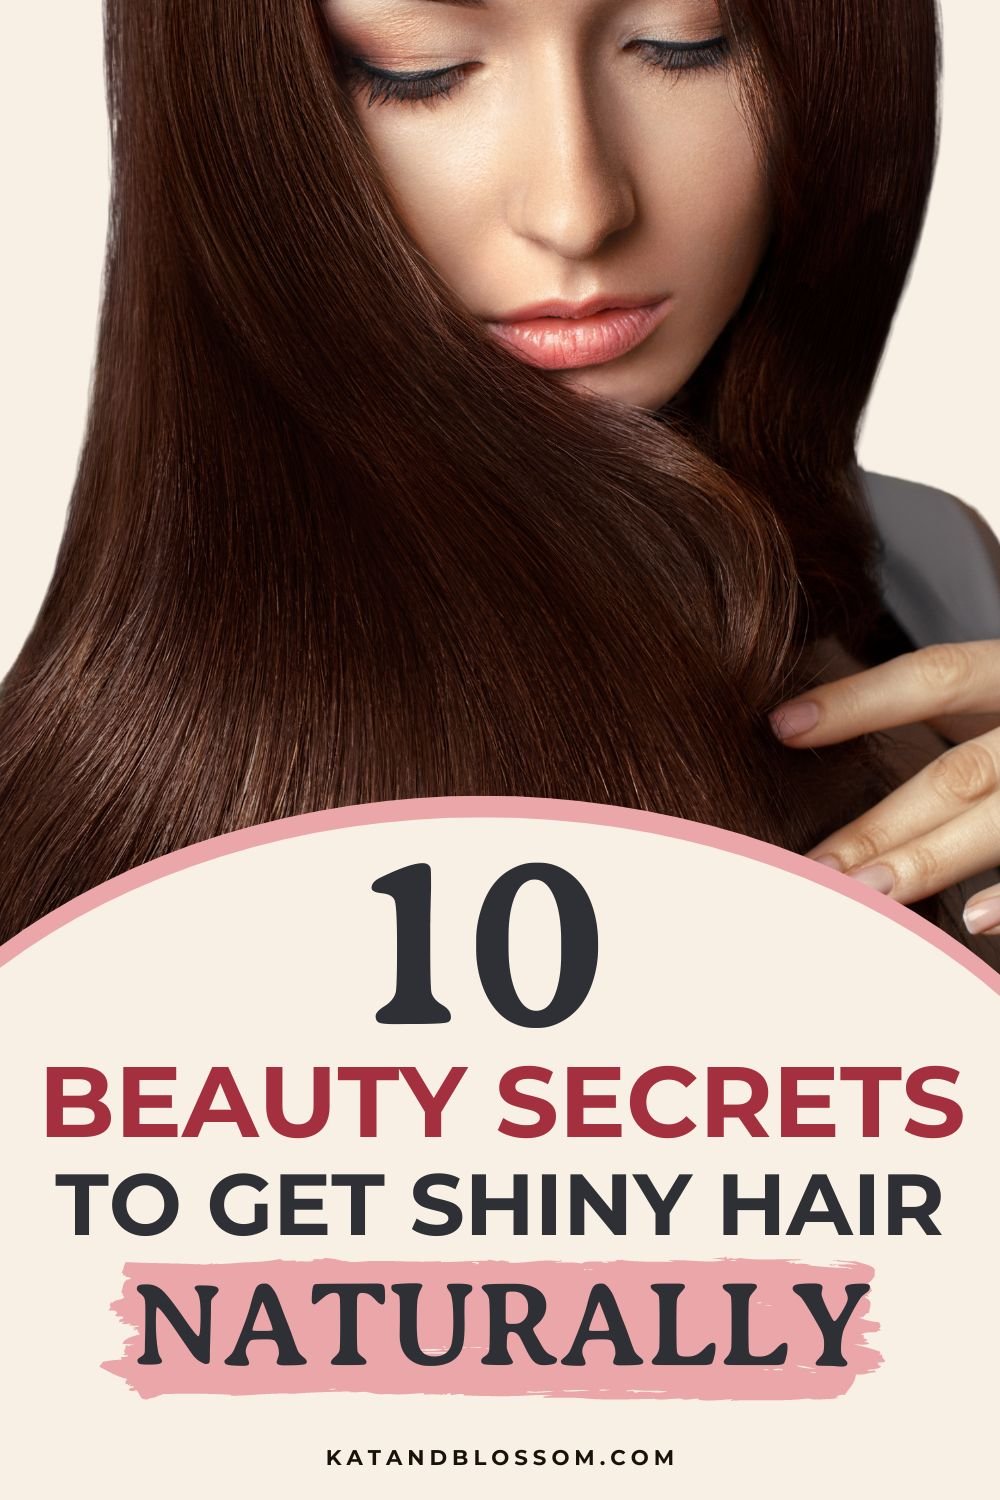 10 Beauty Secrets How To Make Hair Look Shiny Naturally KB Pinterest Cover